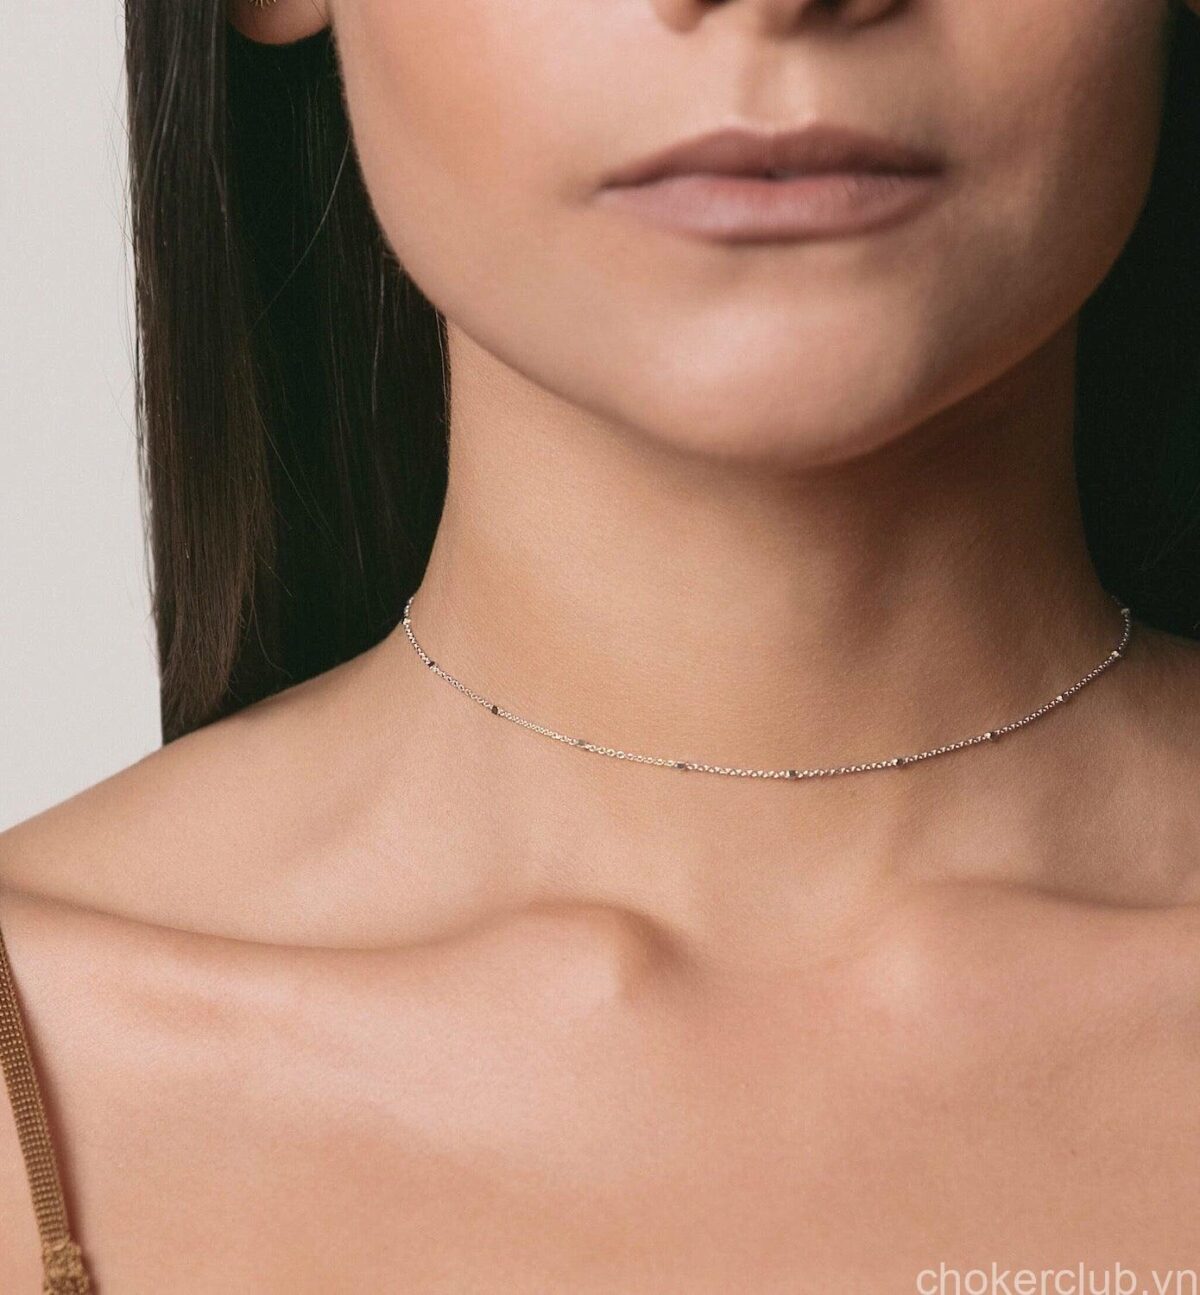 Conclusion: Enhance Your Style With Timeless Dainty Choker Necklaces